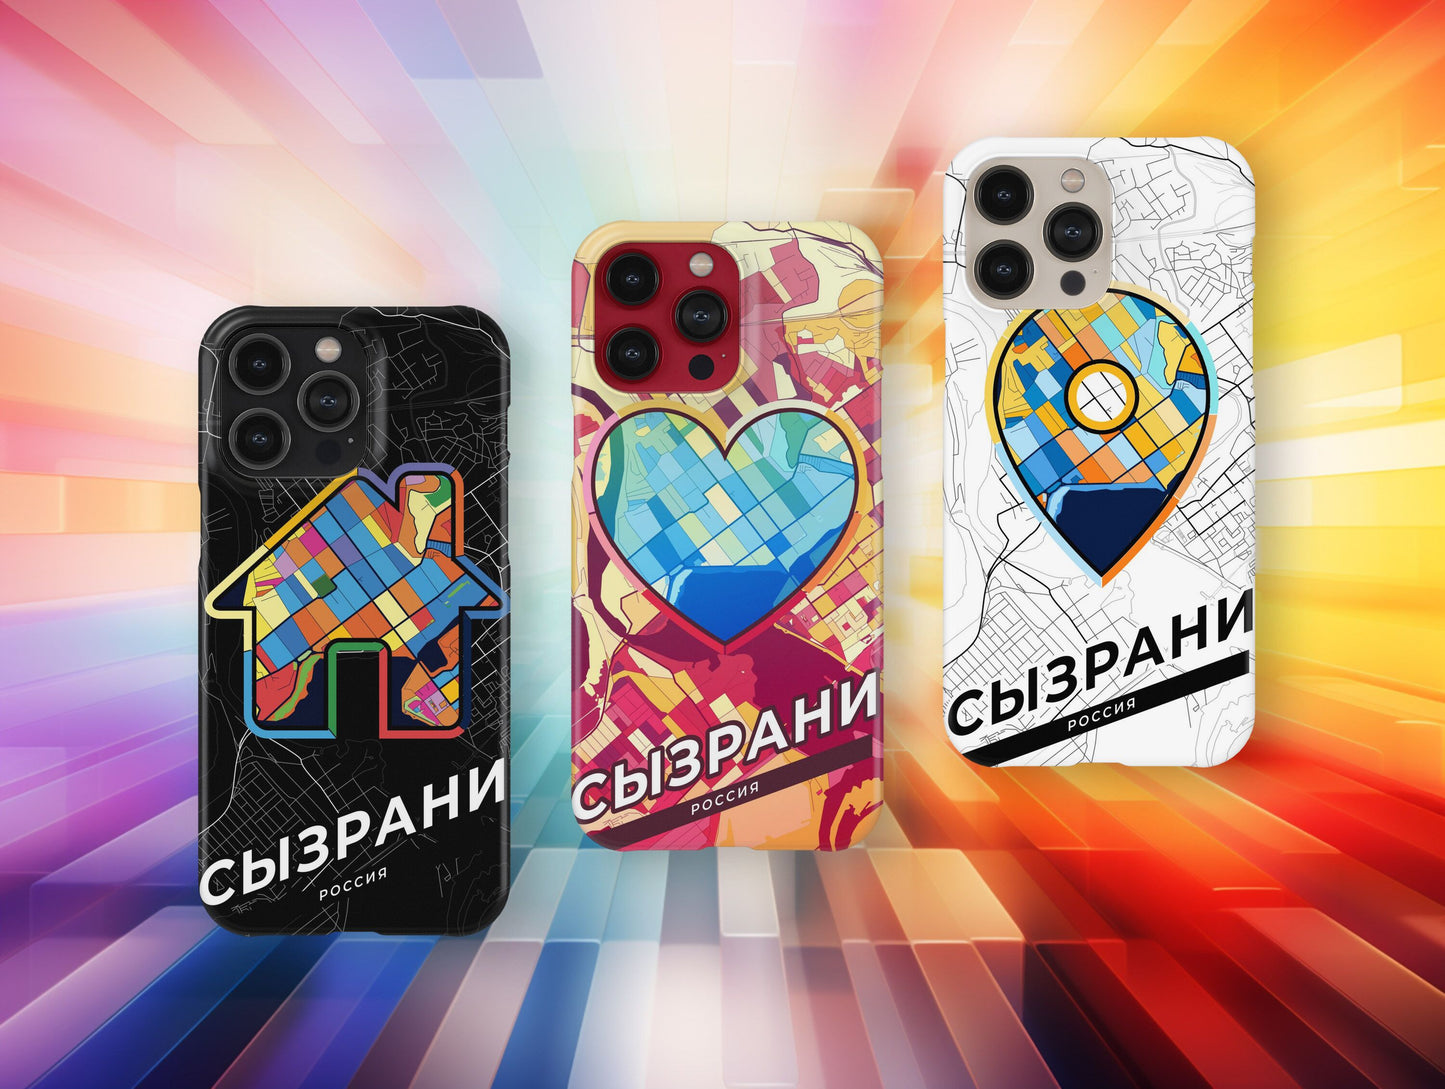 Syzran Russia slim phone case with colorful icon